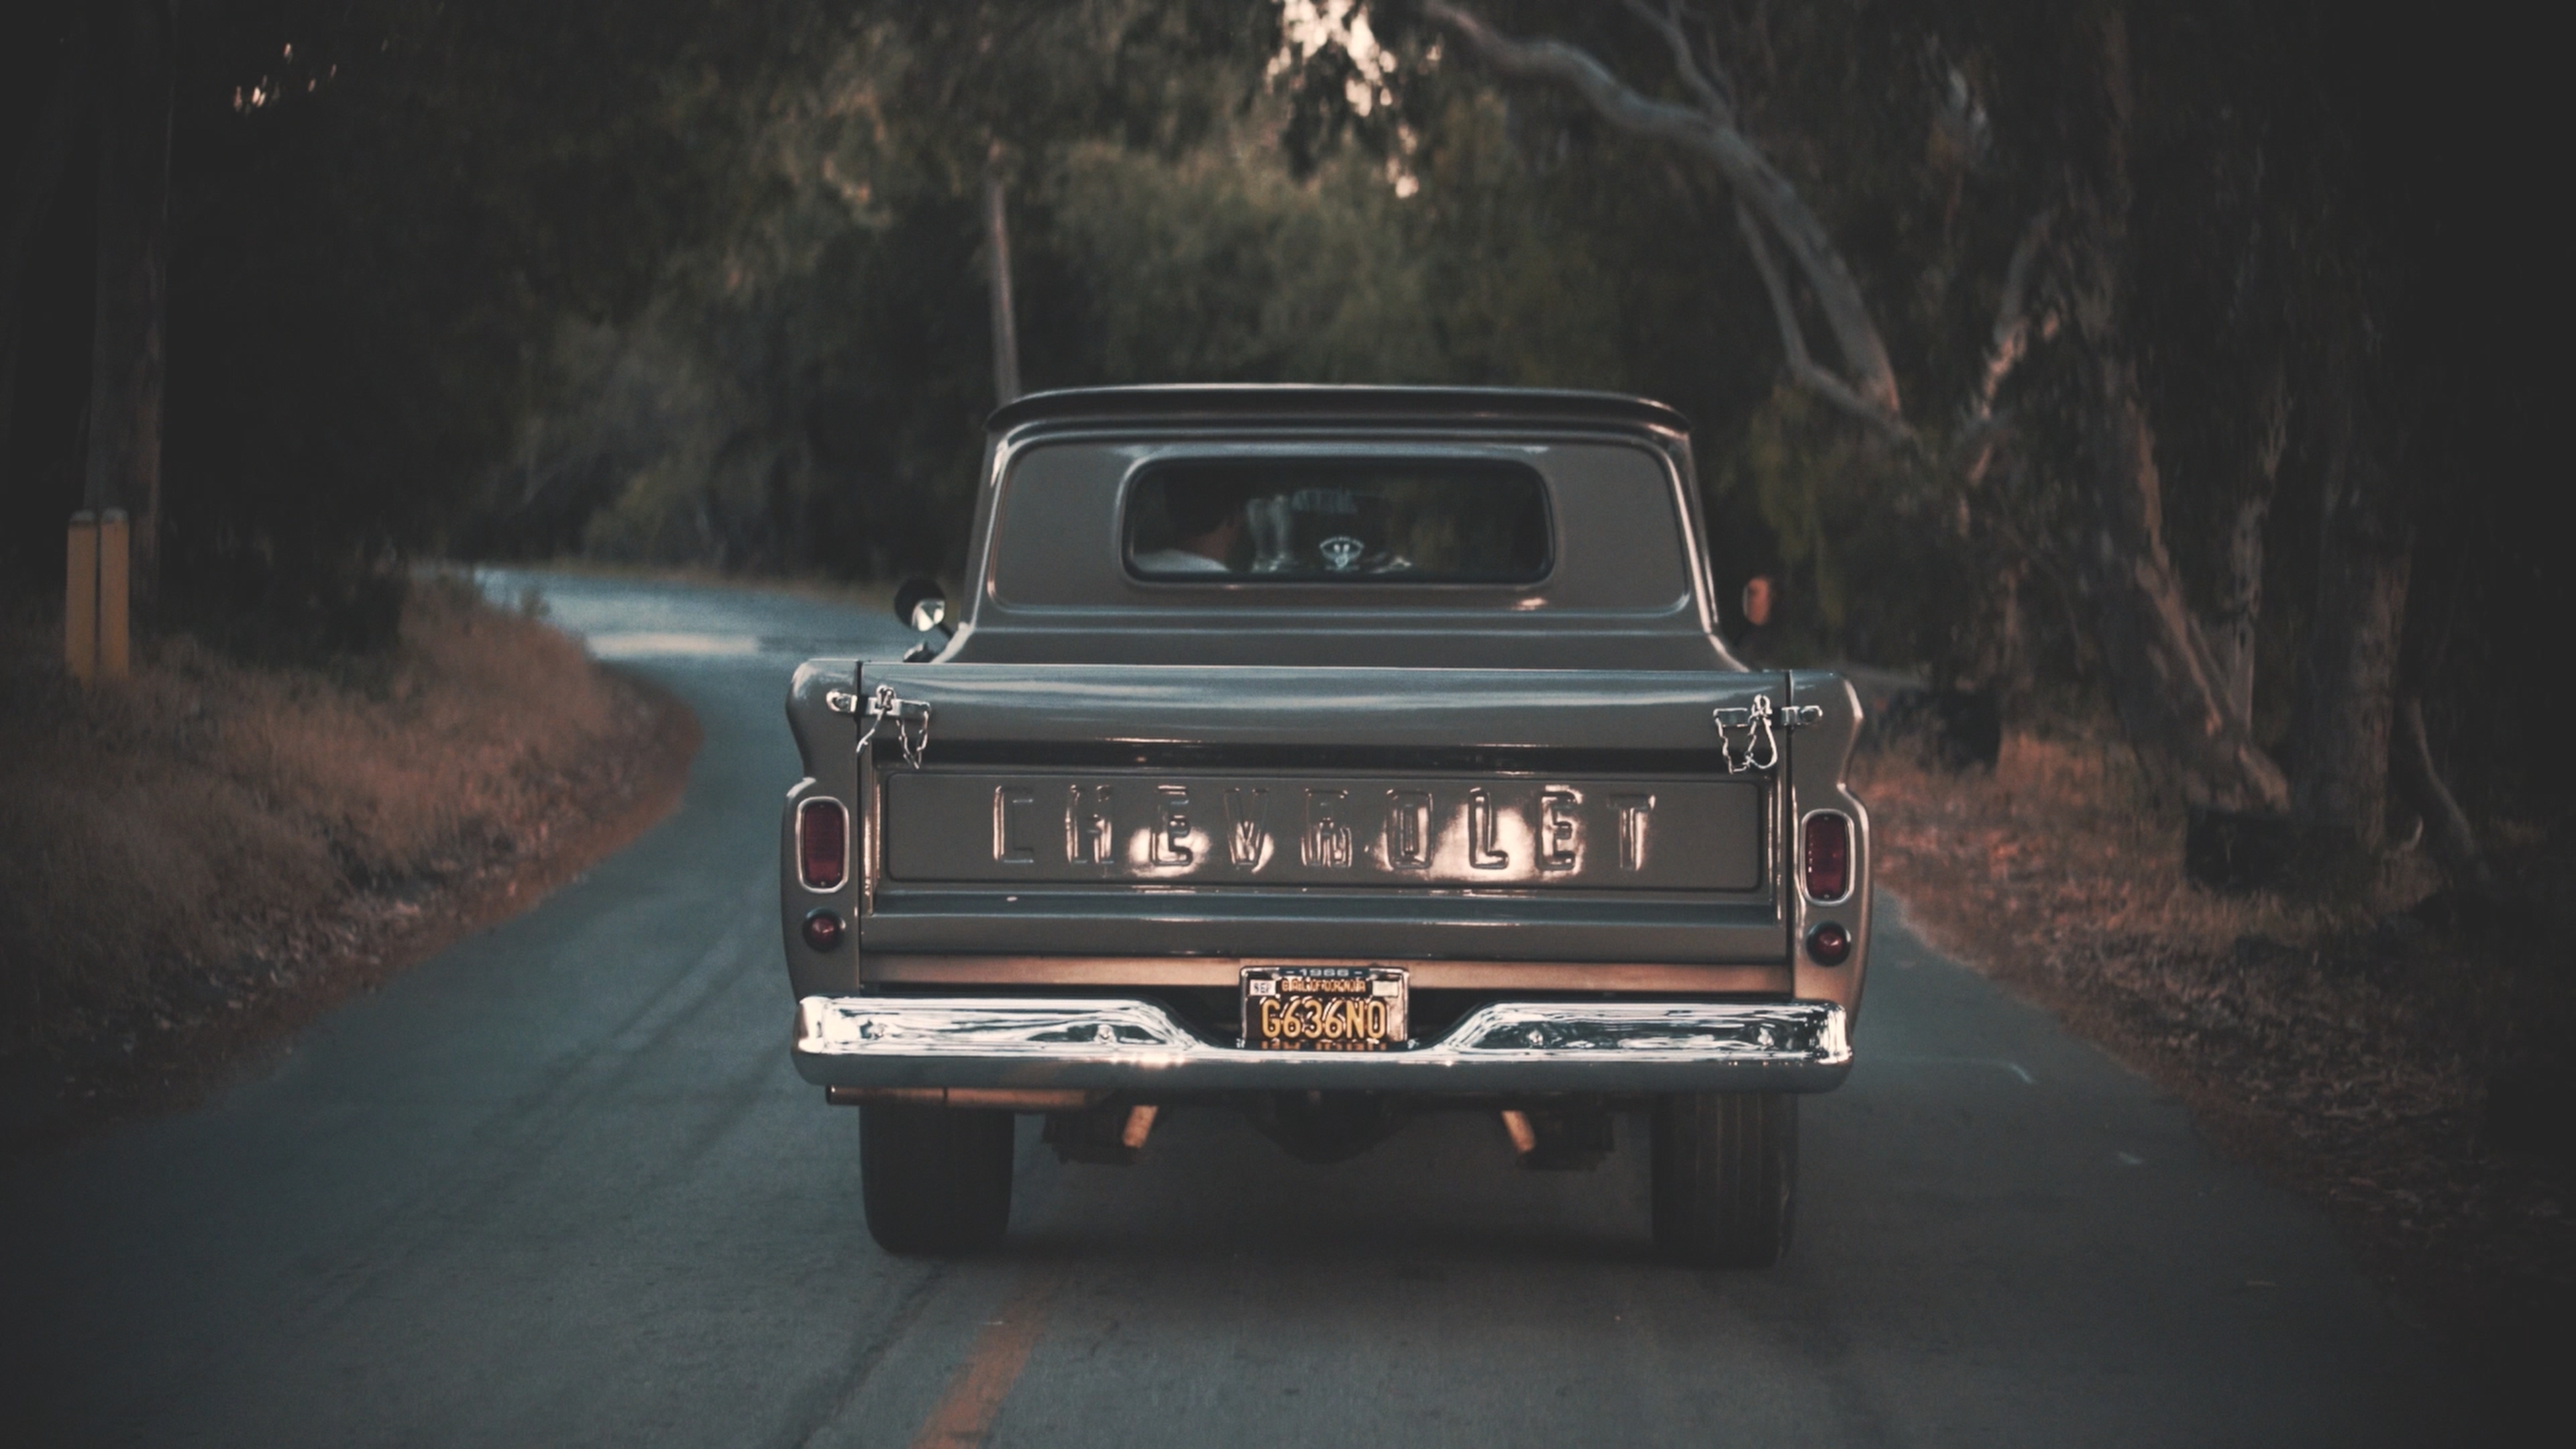 Photo of vintage pickup truck on a road surrounded by trees